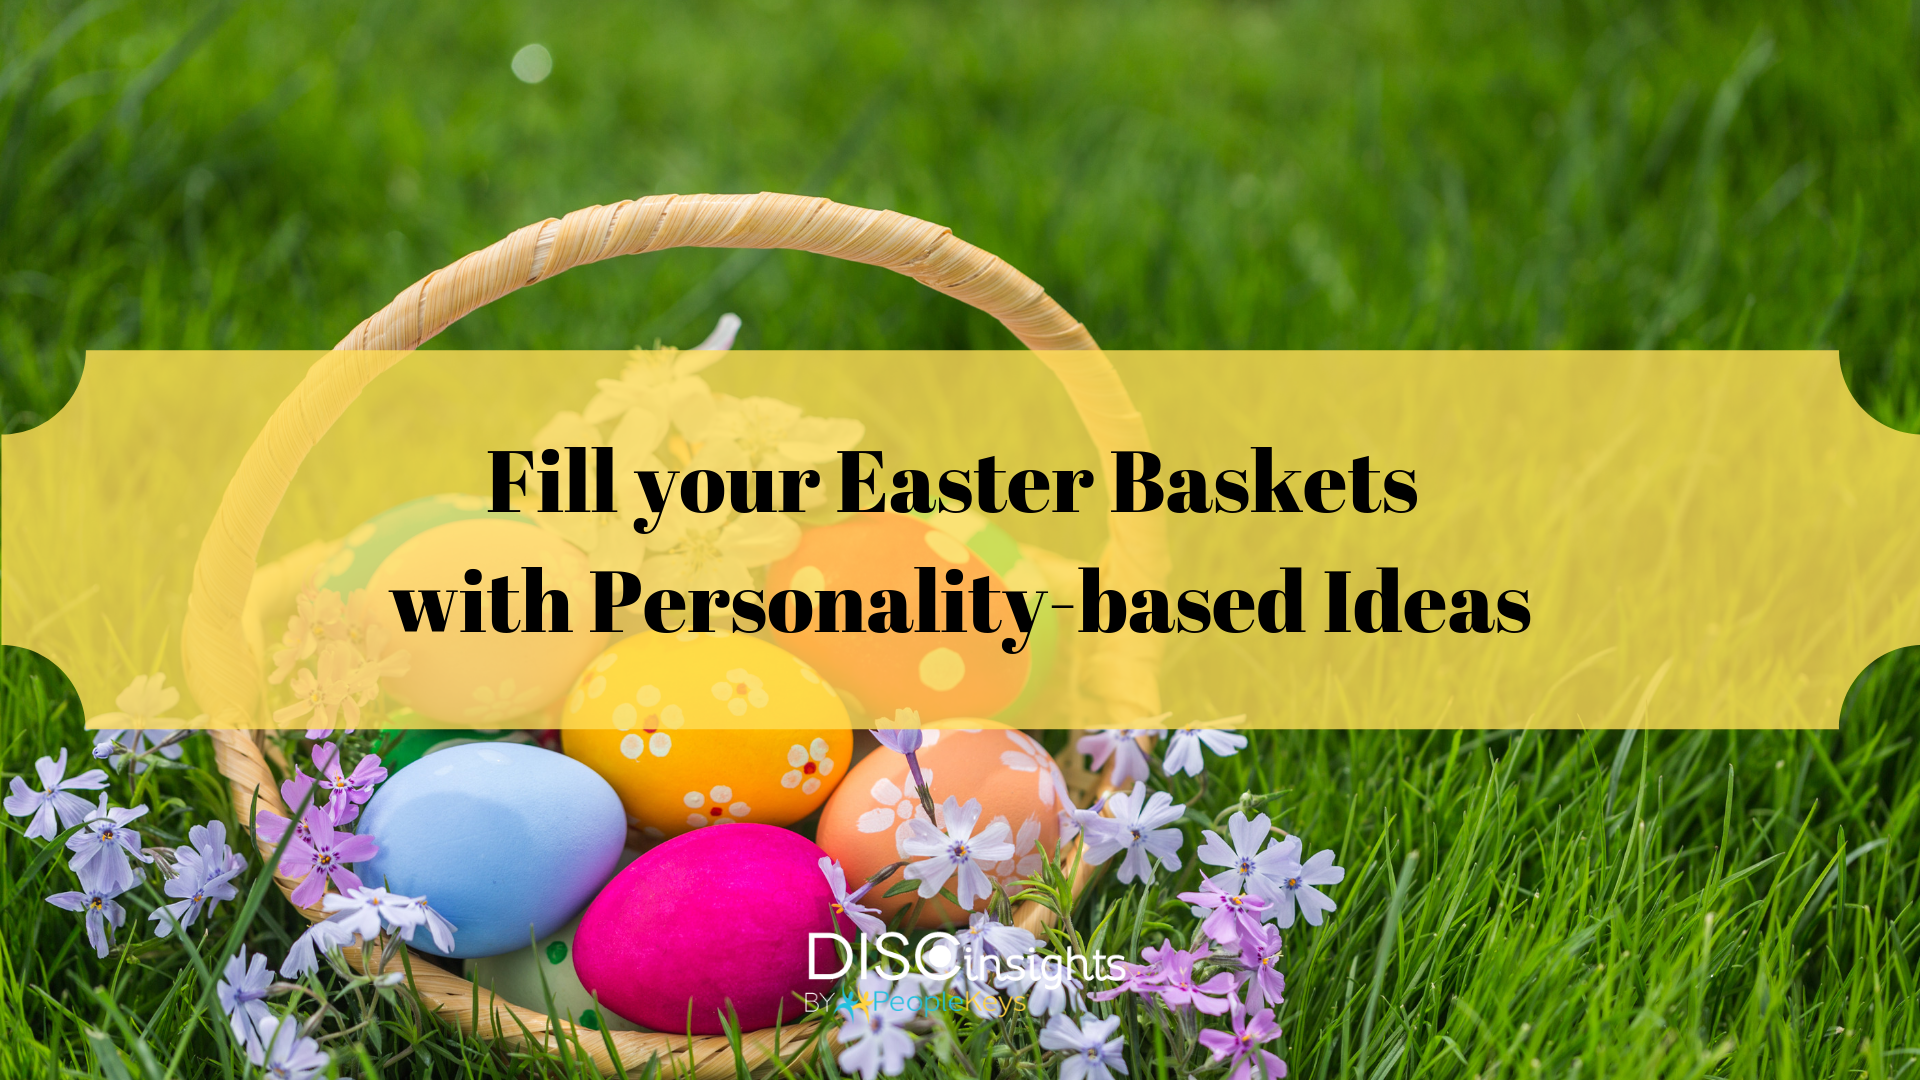 Fill your Easter Baskets with Personality-based Ideas